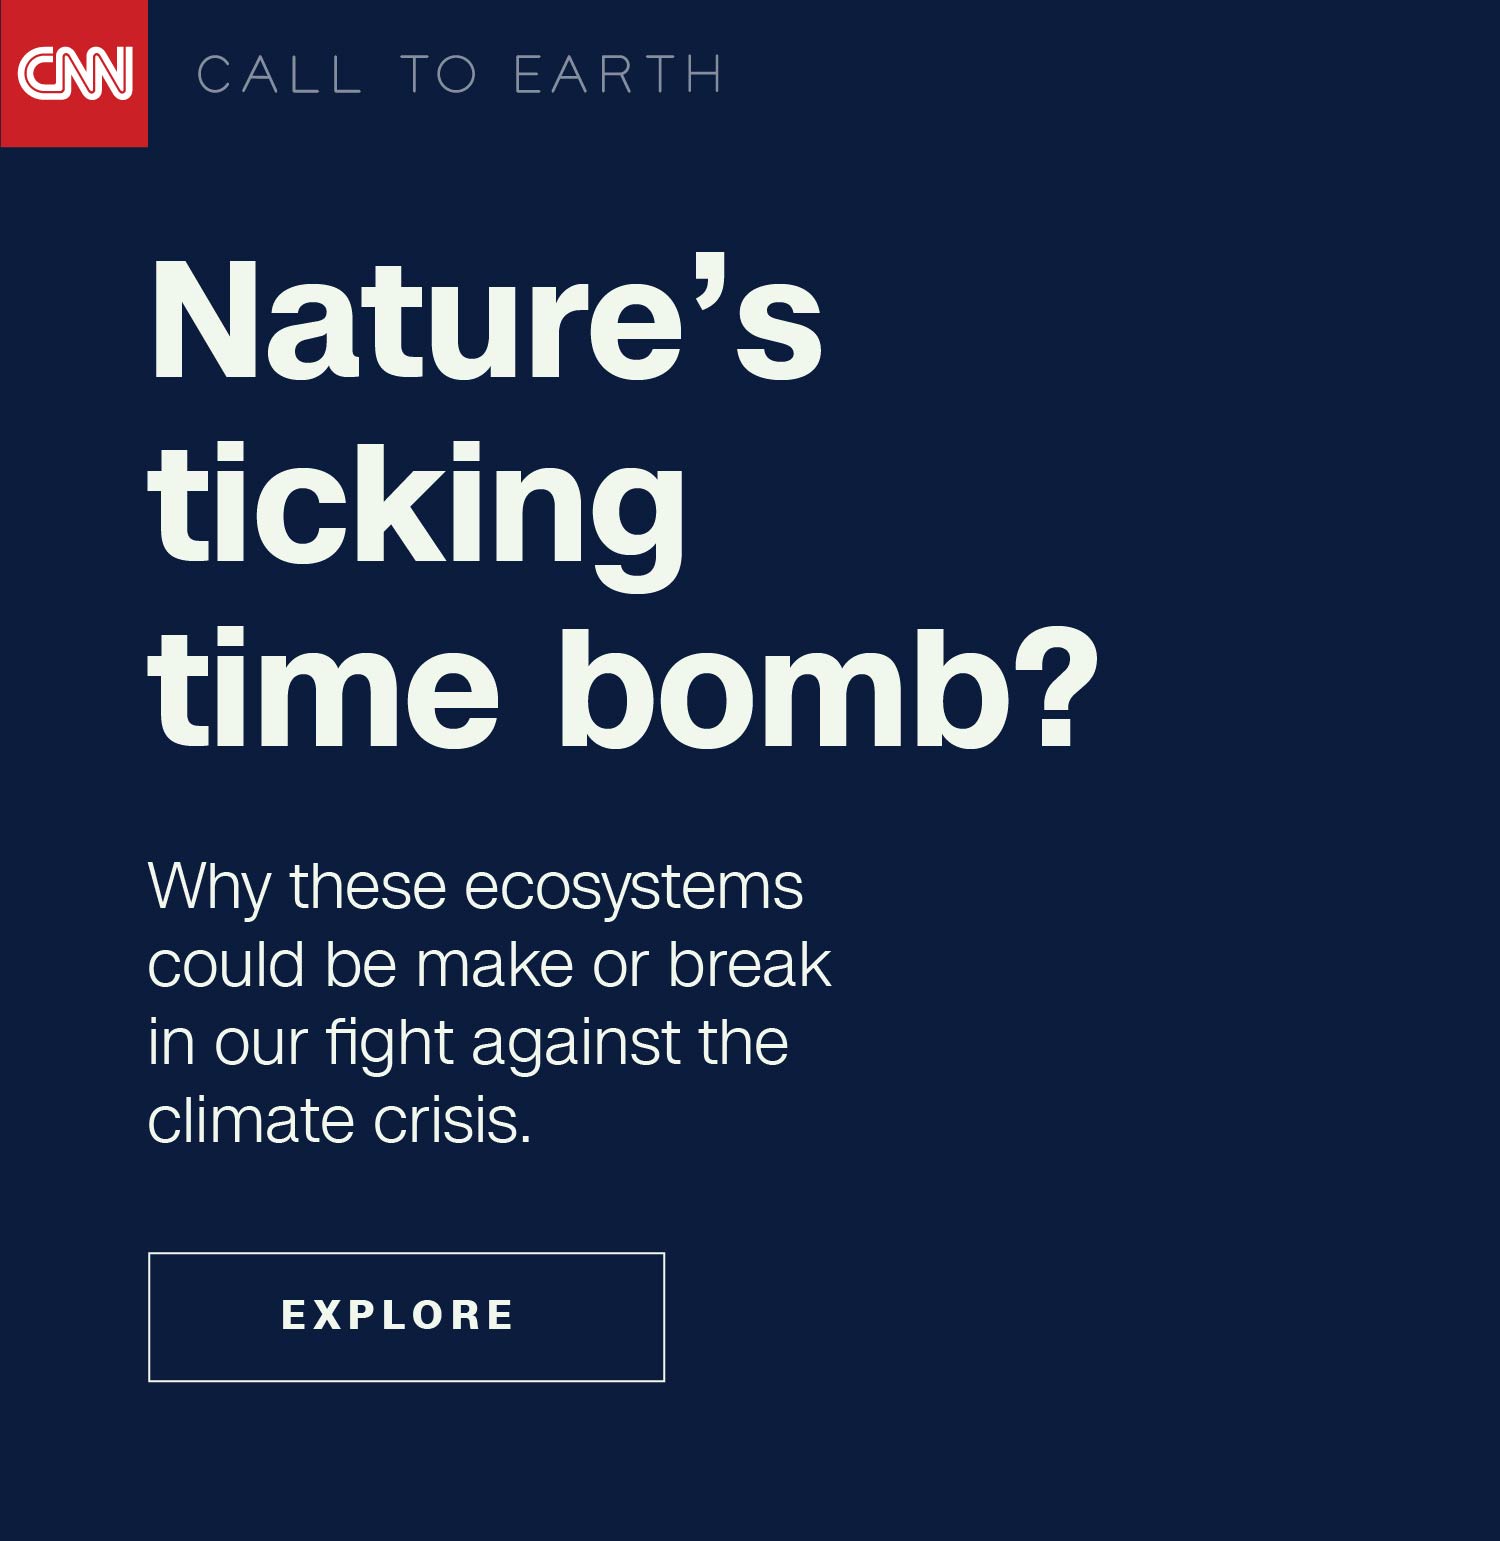 Nature's ticking ticking time bomb?